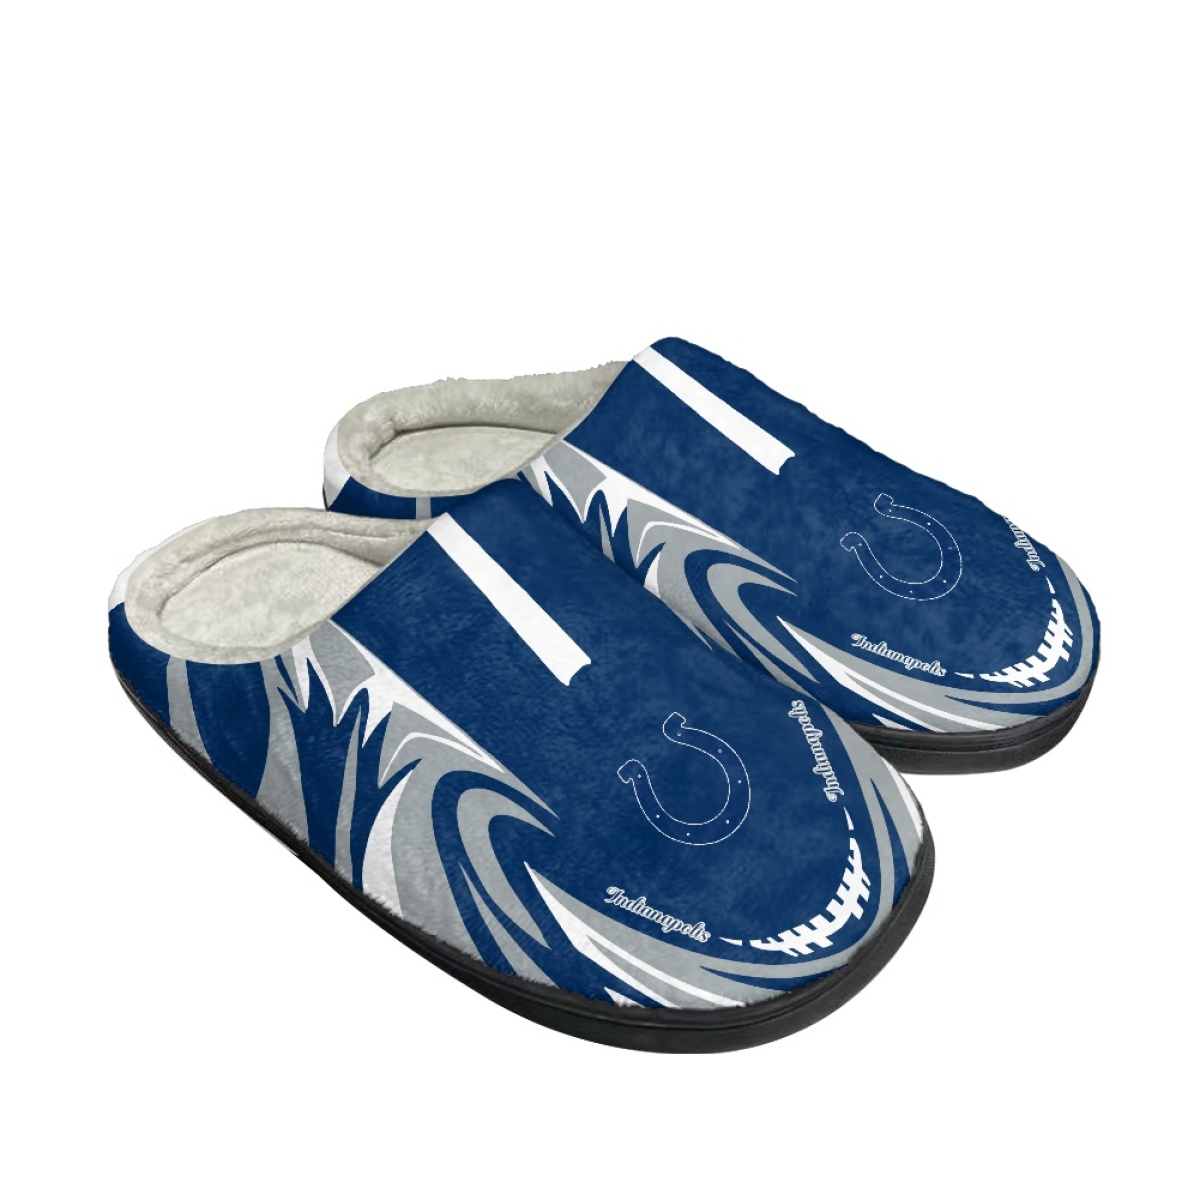 Men's Indianapolis Colts Slippers/Shoes 004